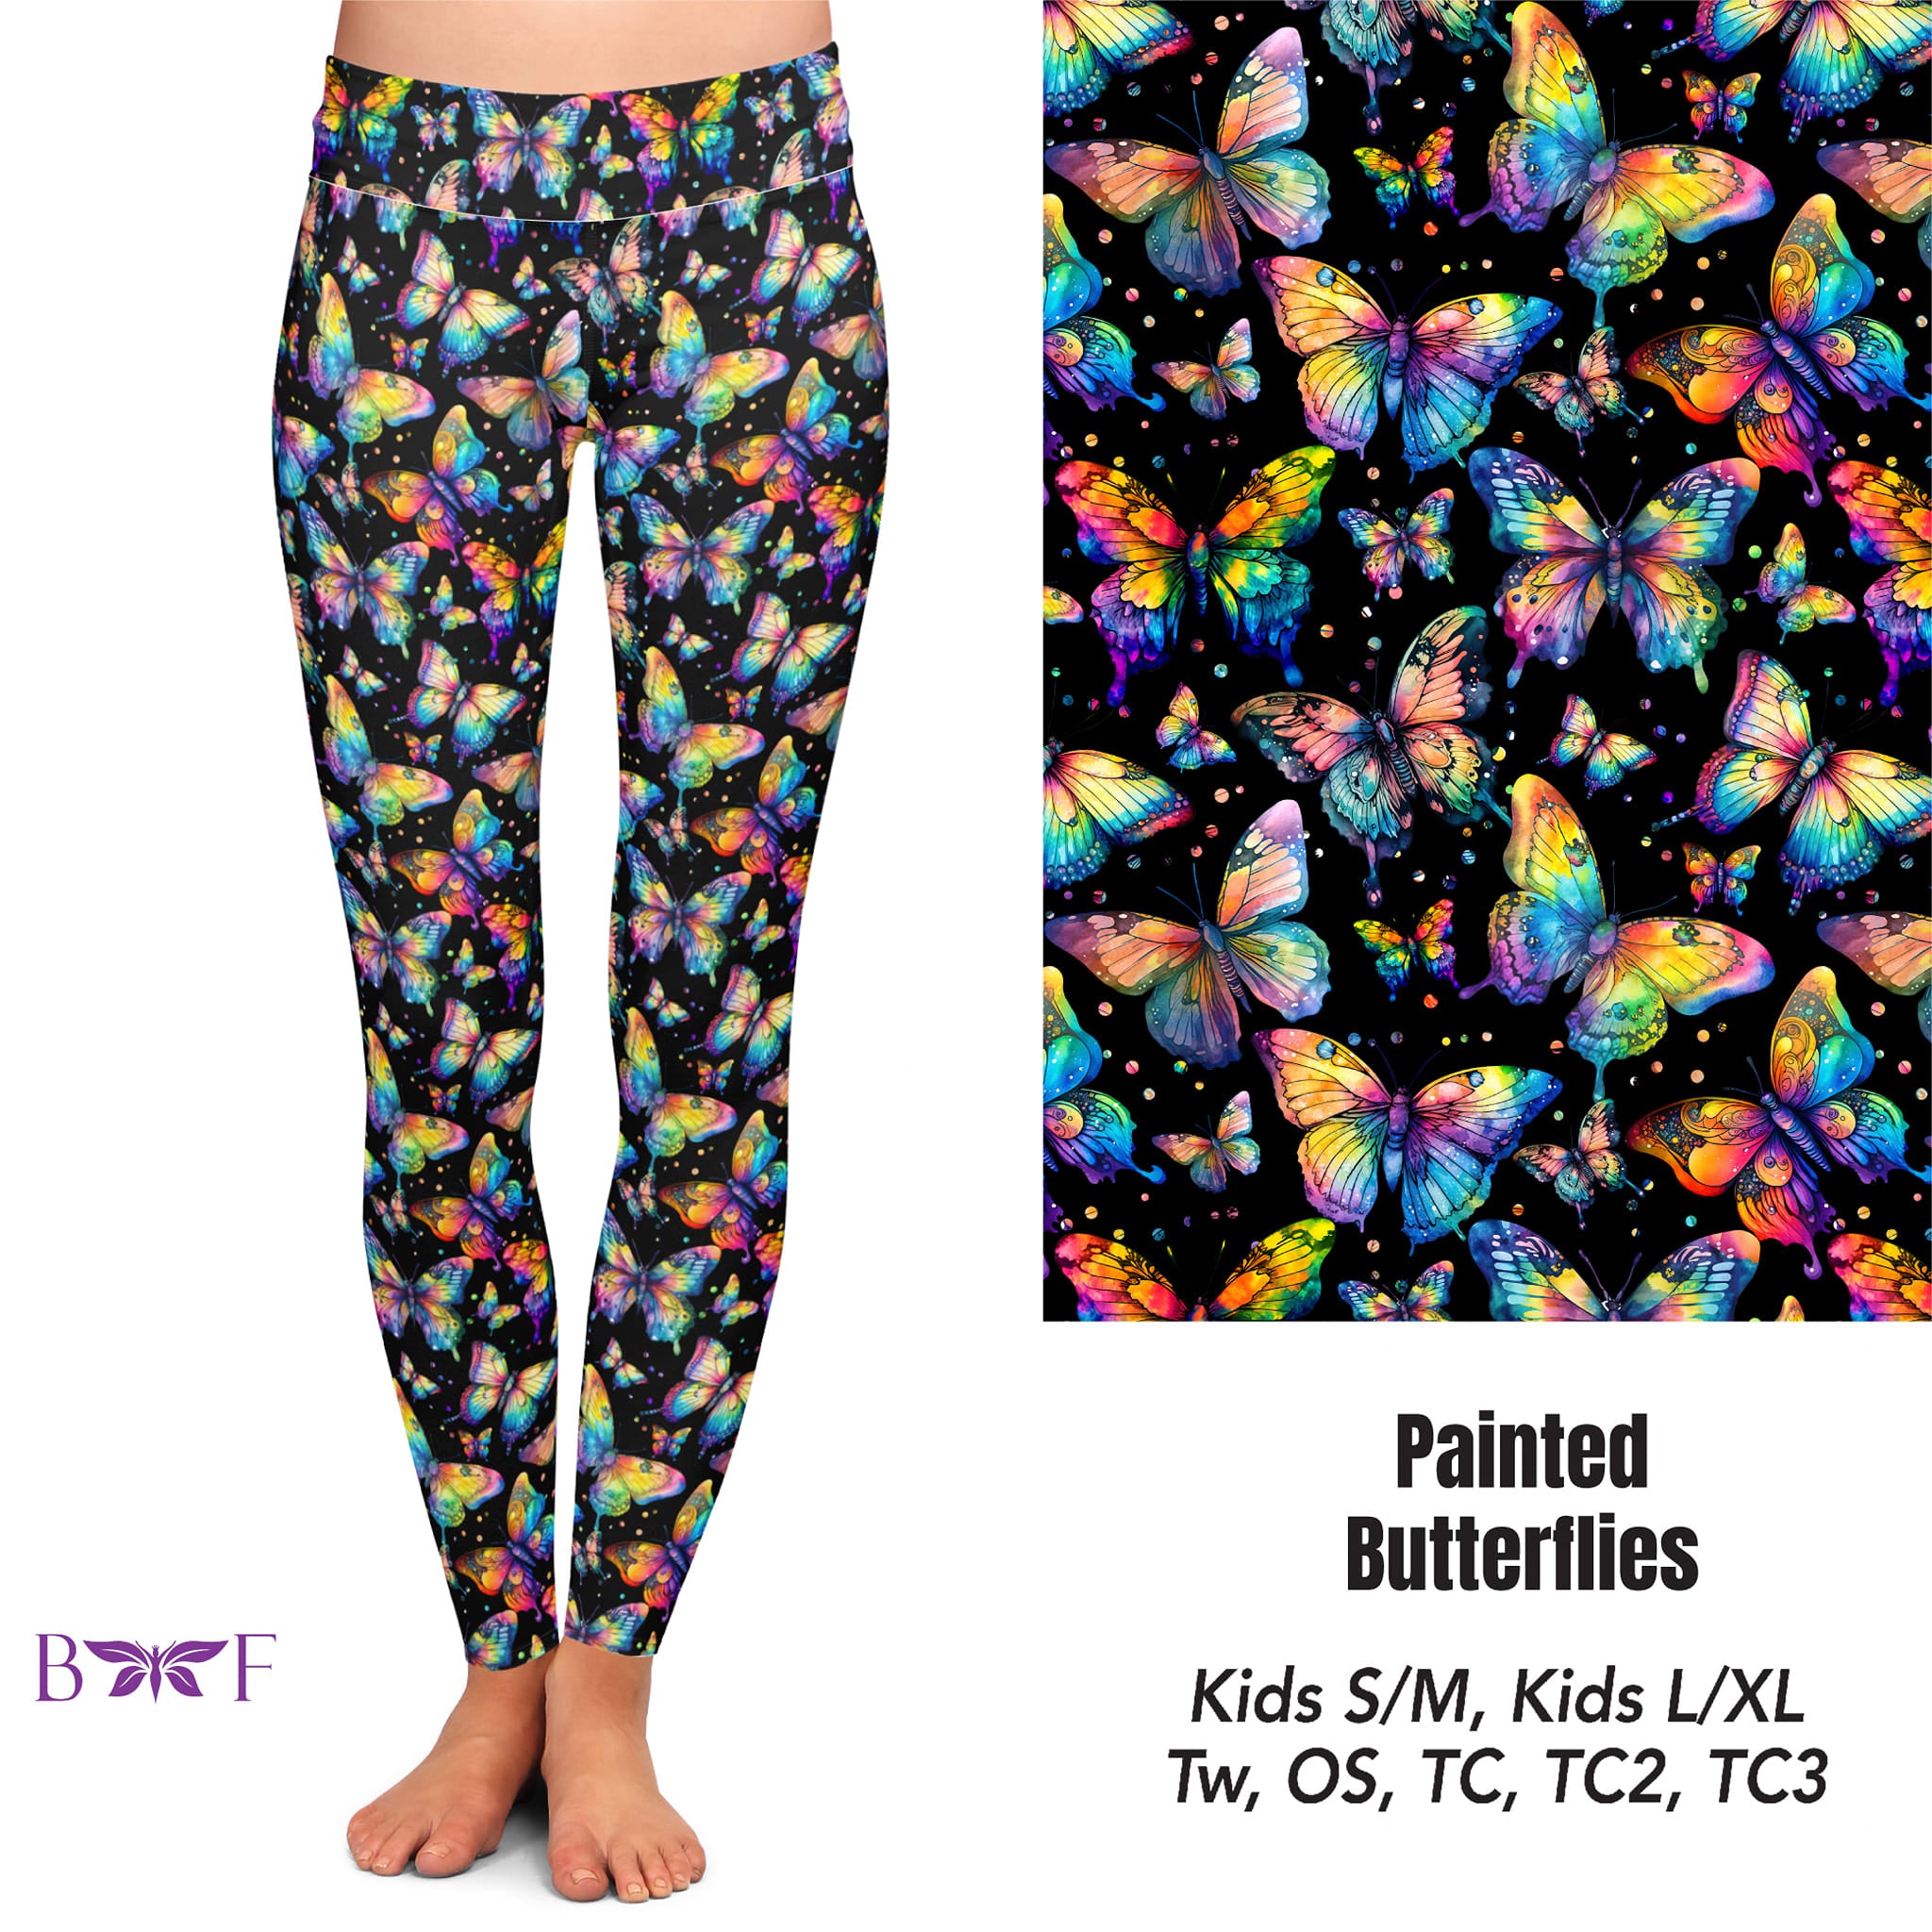 Painted Butterflies Capris, and Bike Shorts